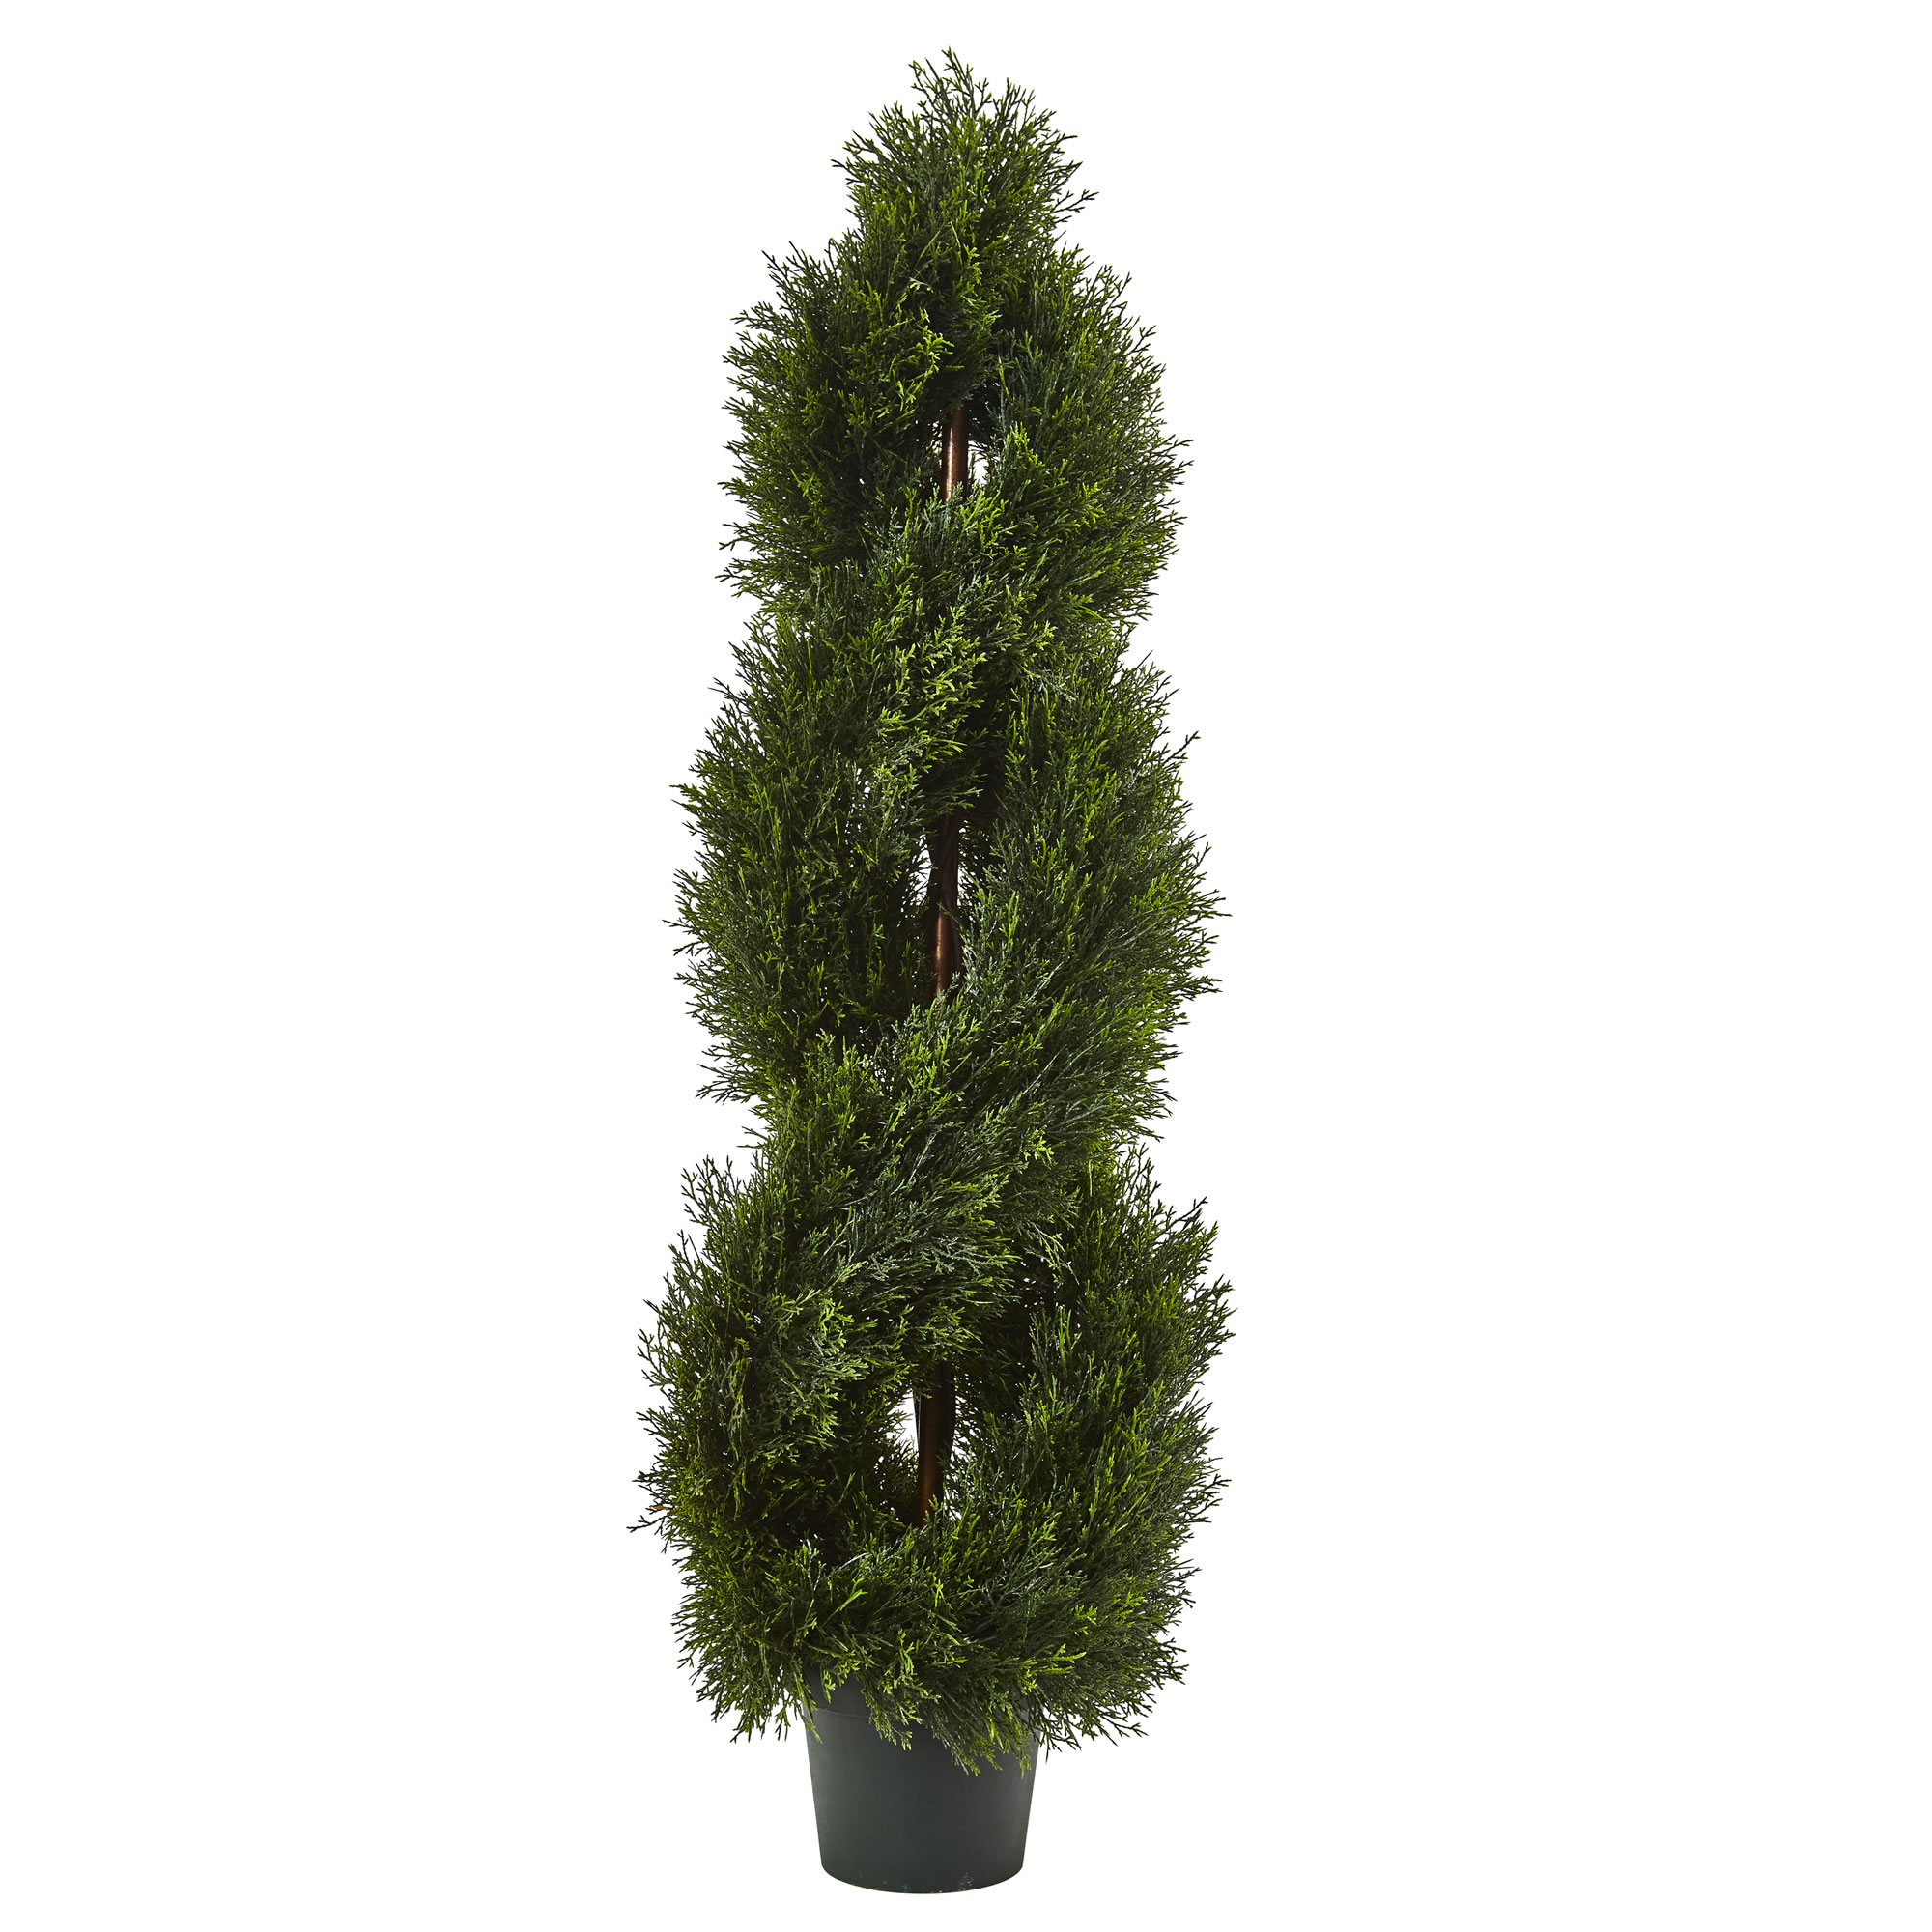 4 Foot Double Pond Cypress Spiral Topiary: Uv Protected